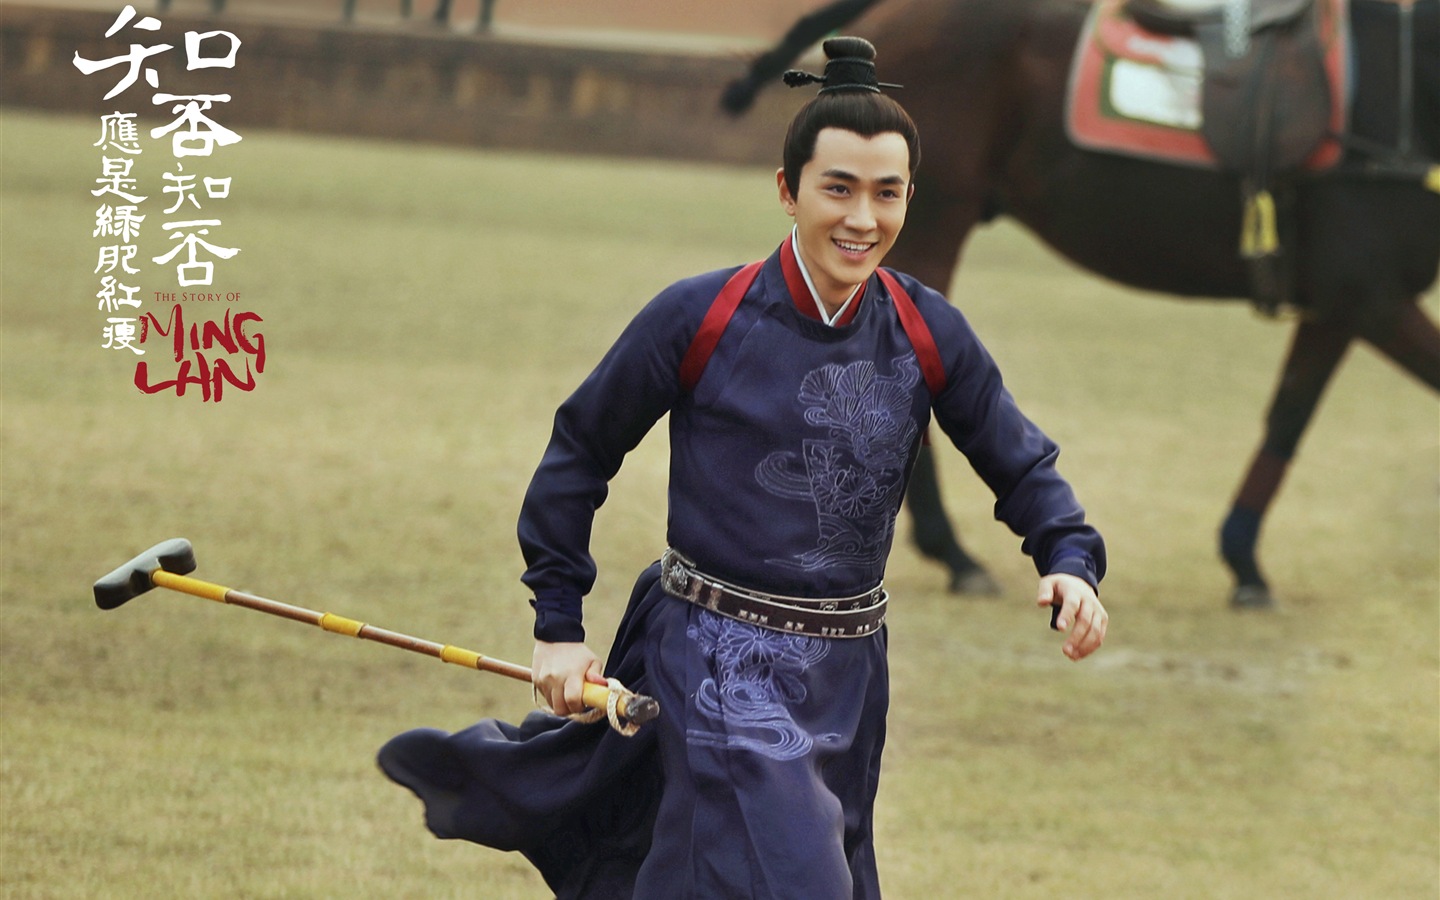 The Story Of MingLan, TV series HD wallpapers #25 - 1440x900